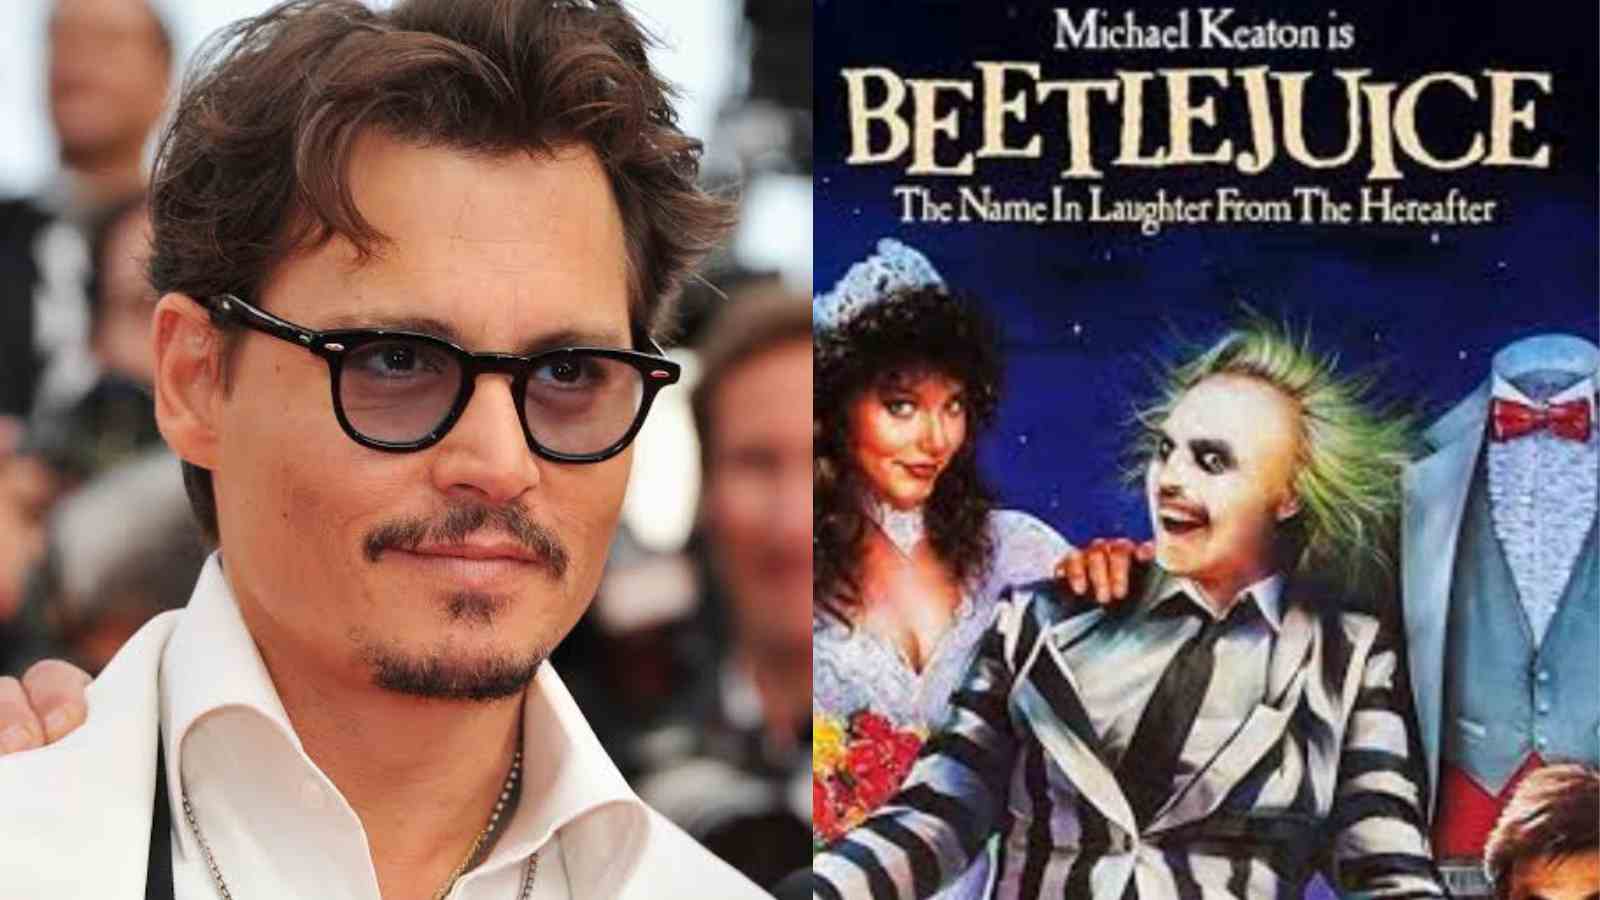 Johnny Depp To Appear In “Beetlejuice 2” Along With Winona Ryder?